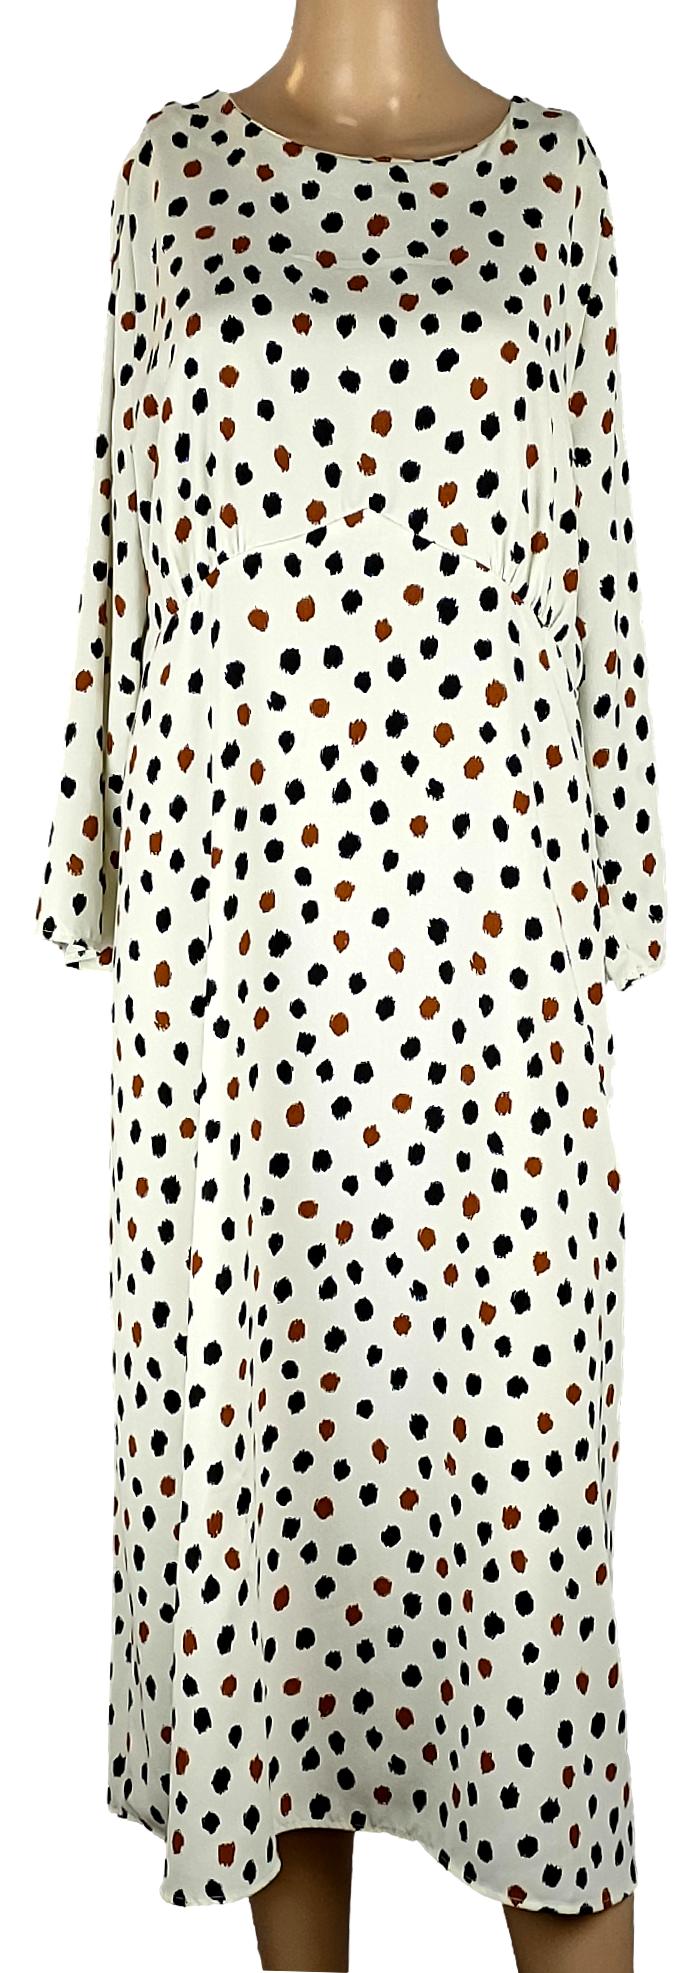 Robe H&M -Taille 46